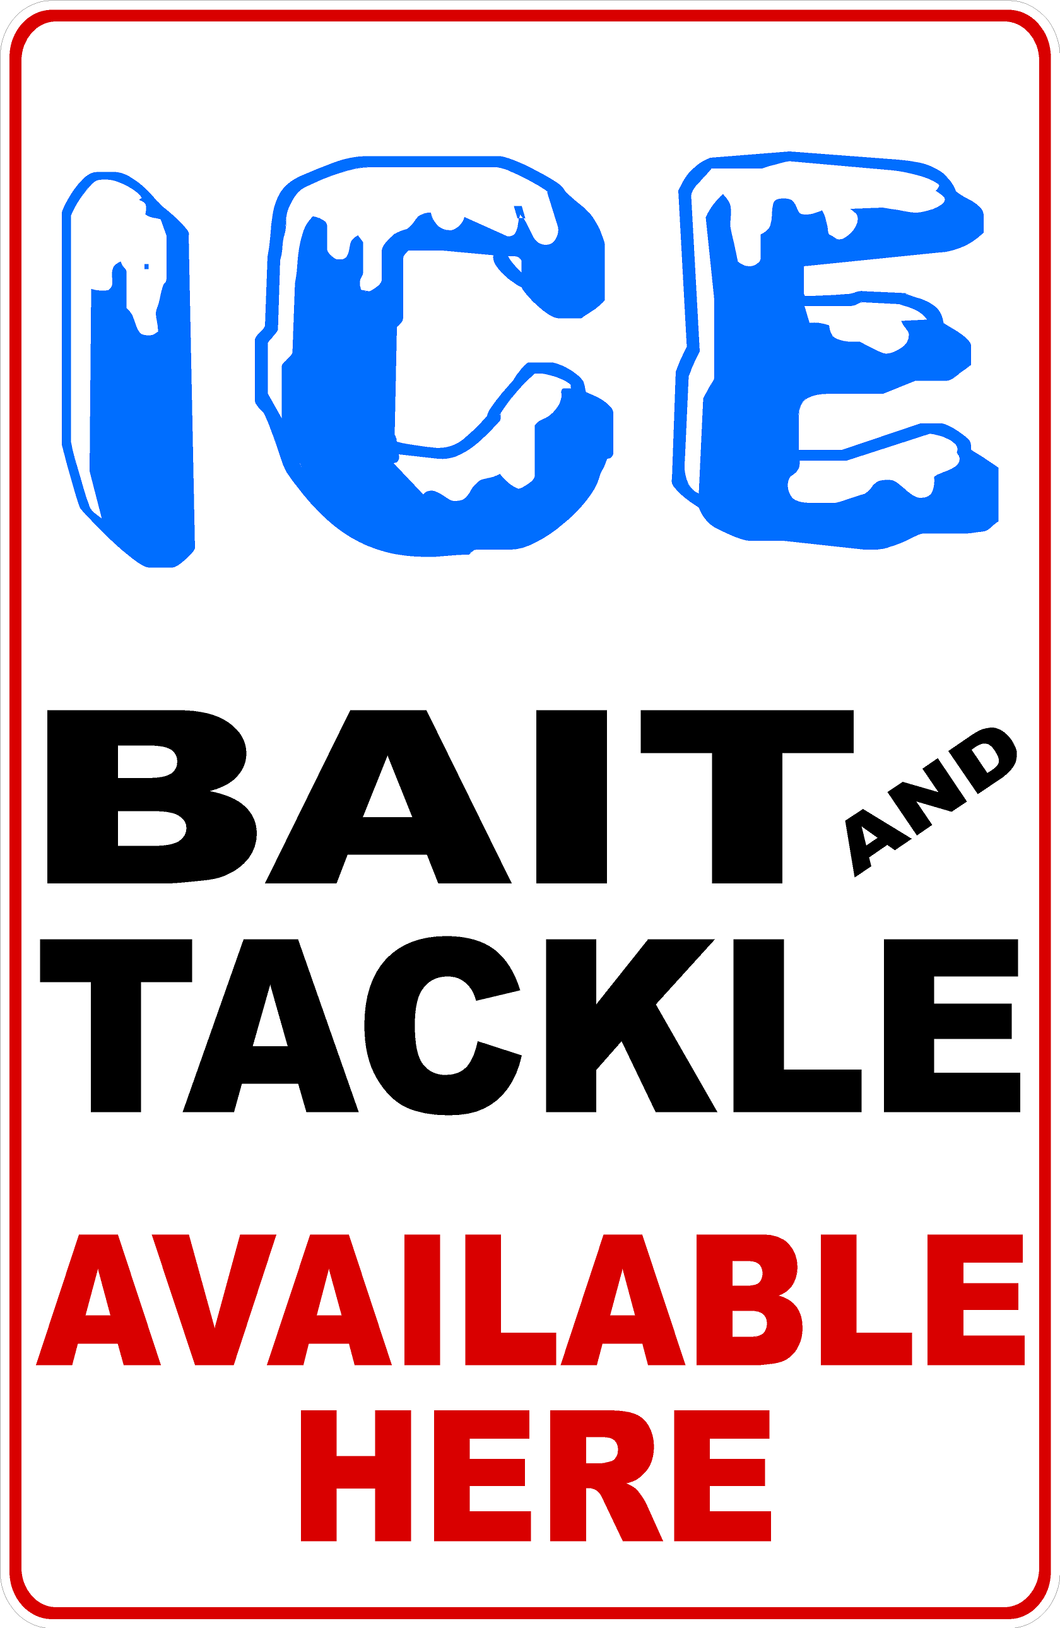 Ice Bait and Tackle Available Here Sign